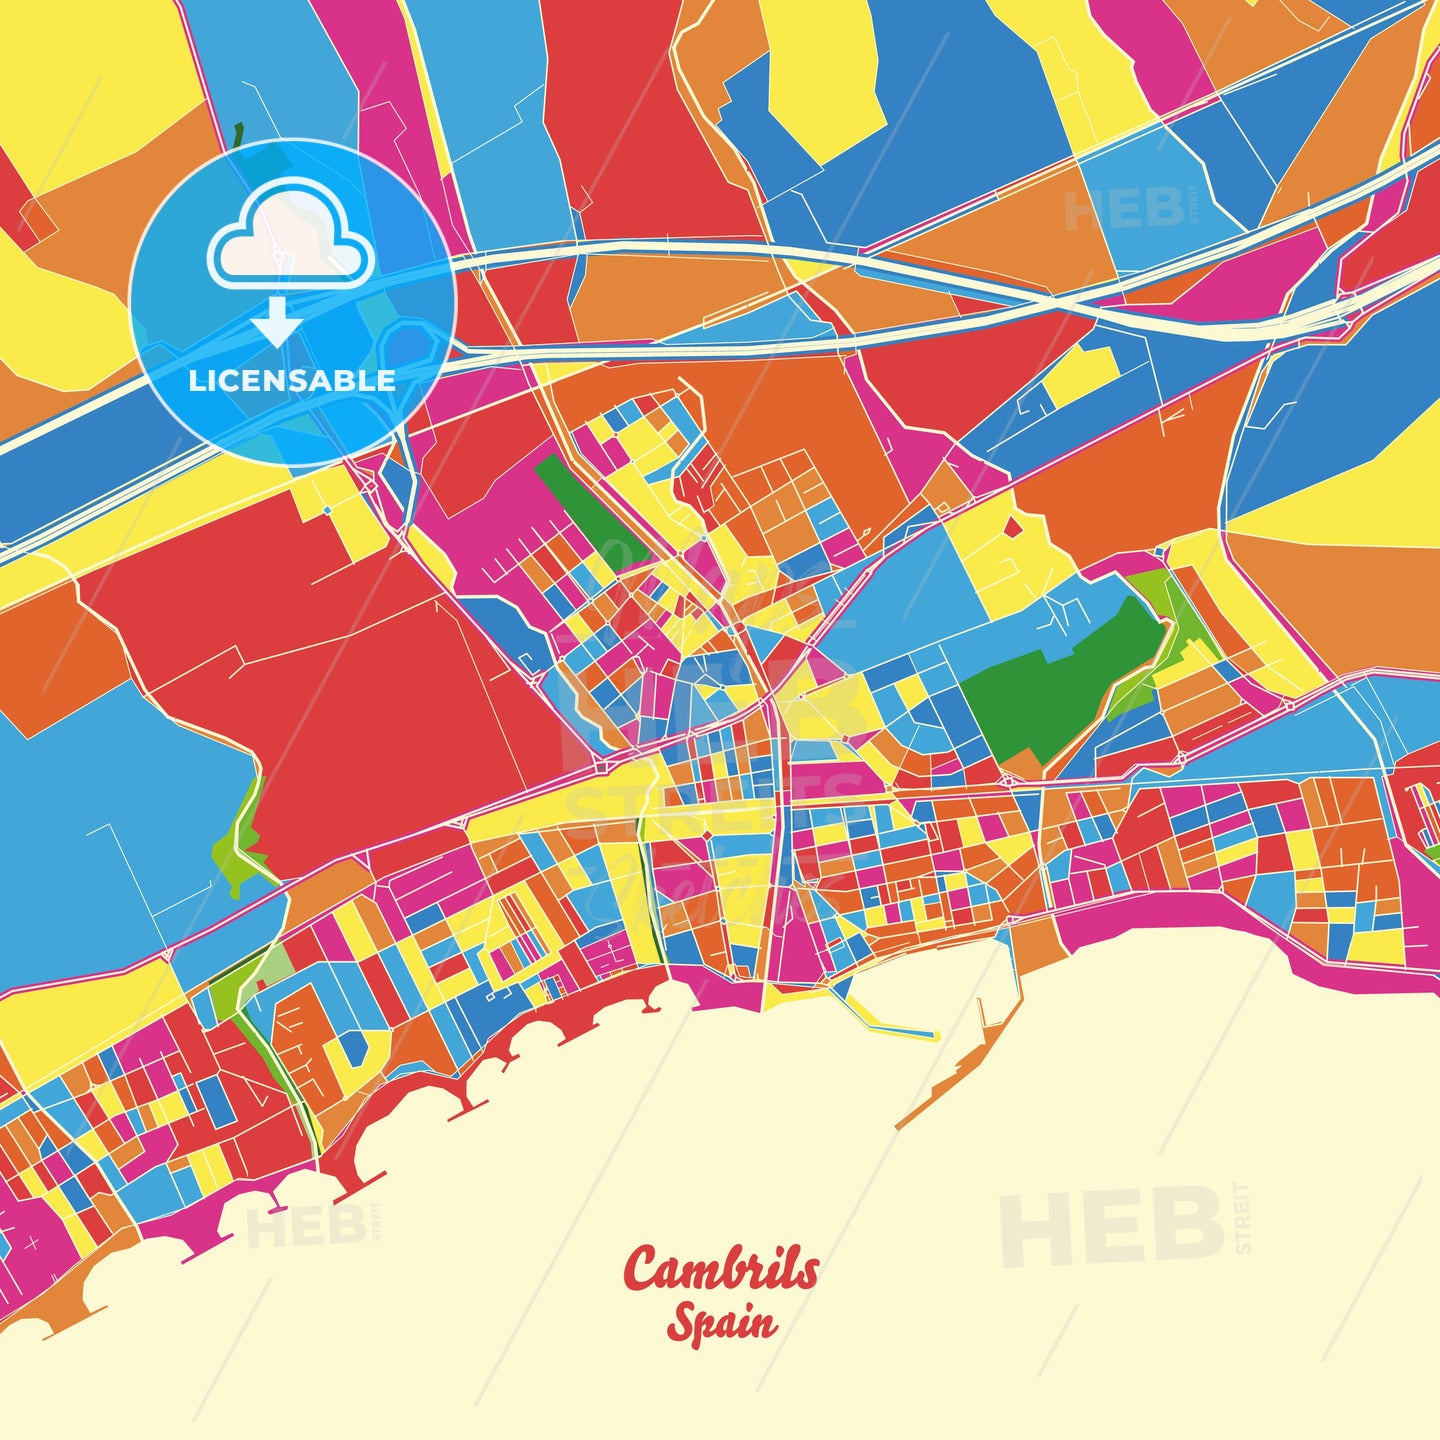 Cambrils, Spain Crazy Colorful Street Map Poster Template - HEBSTREITS Sketches